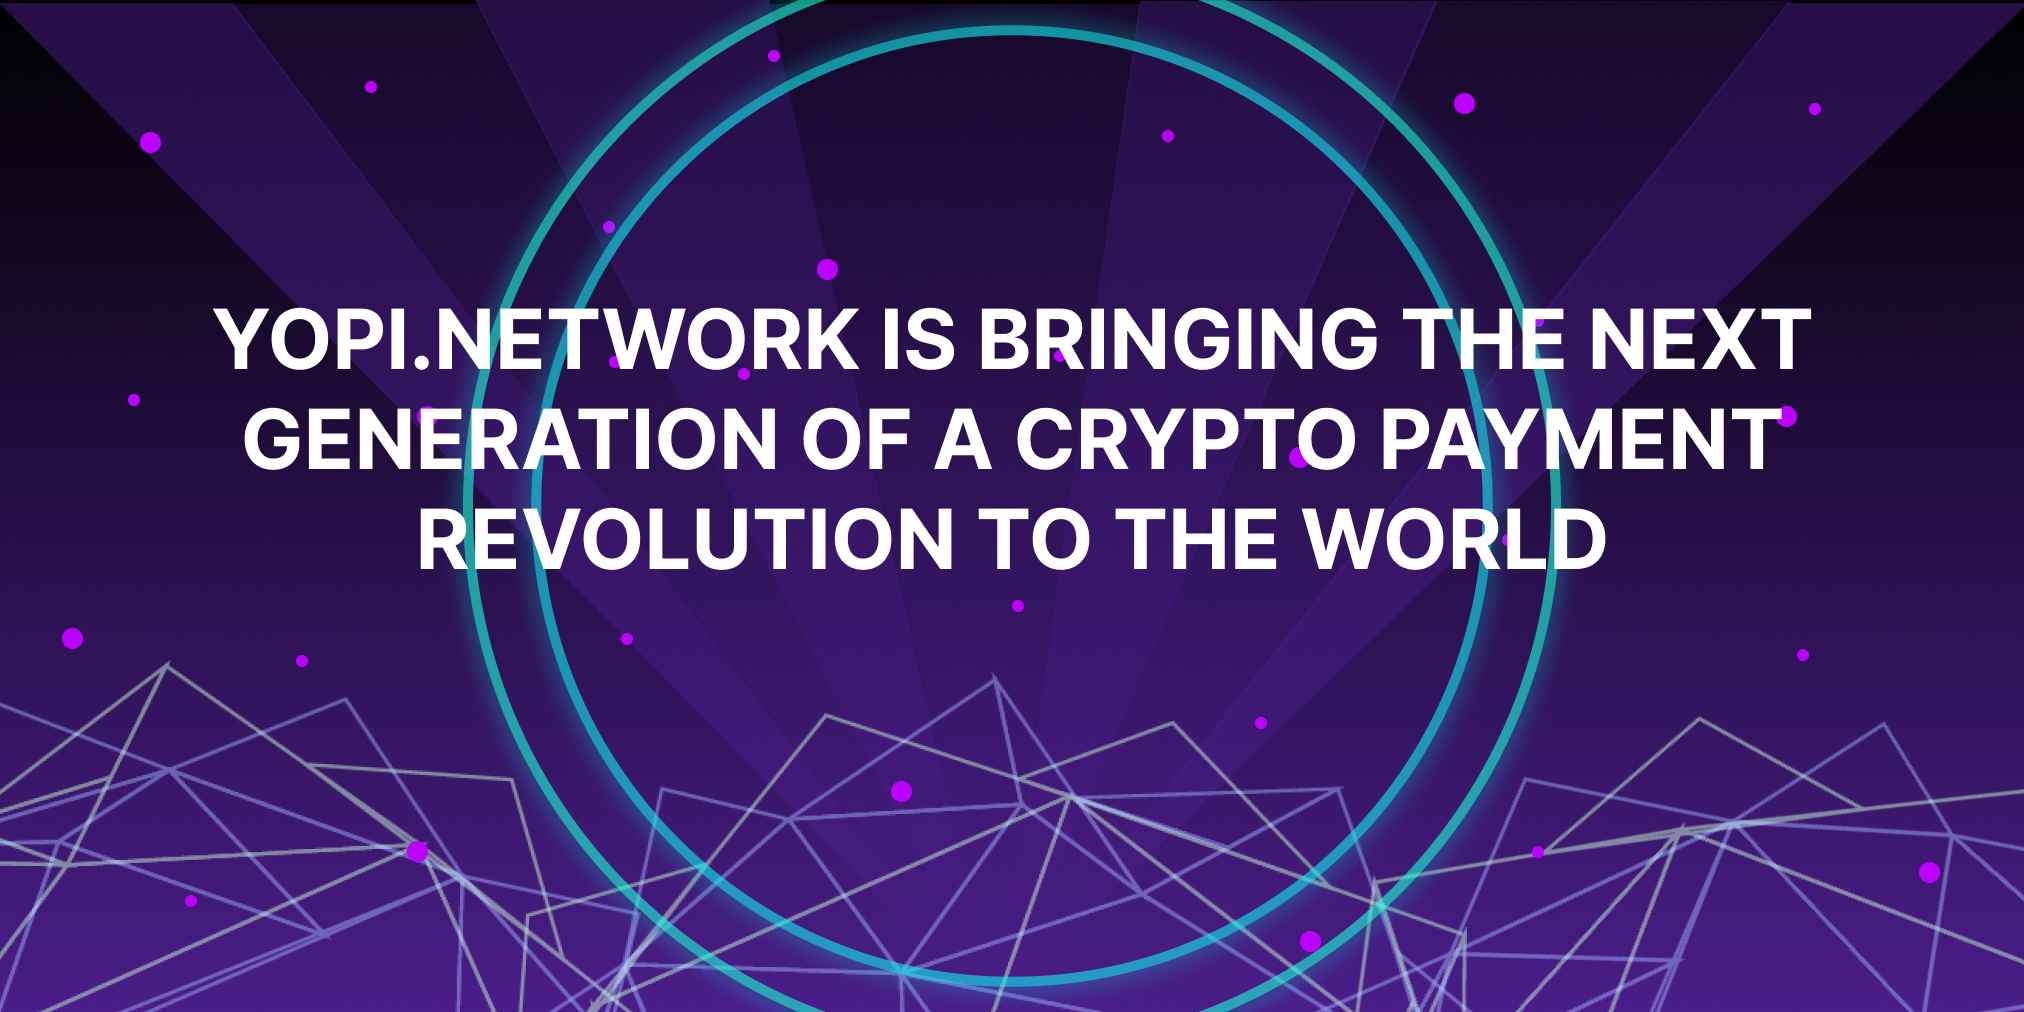 , Yopichain Is Bringing the Next Generation of a Crypto Payment Revolution to the World.